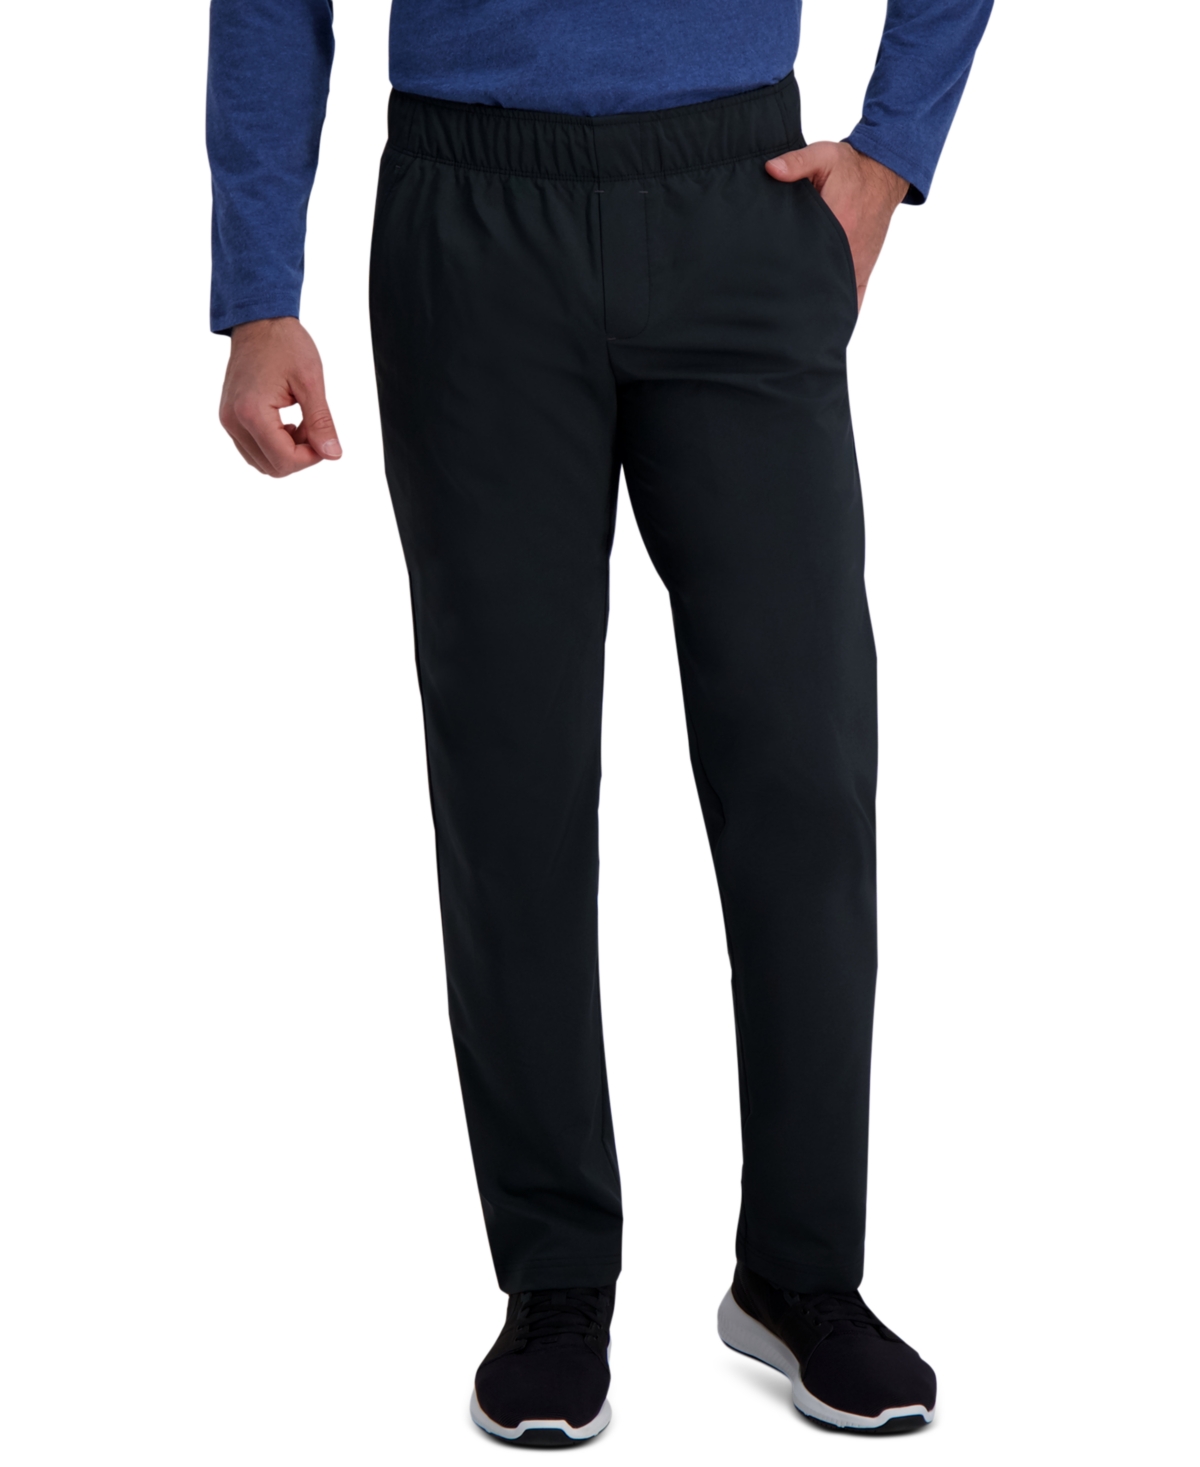 Haggar Active Series Straight Fit Flat Front Comfort Pant